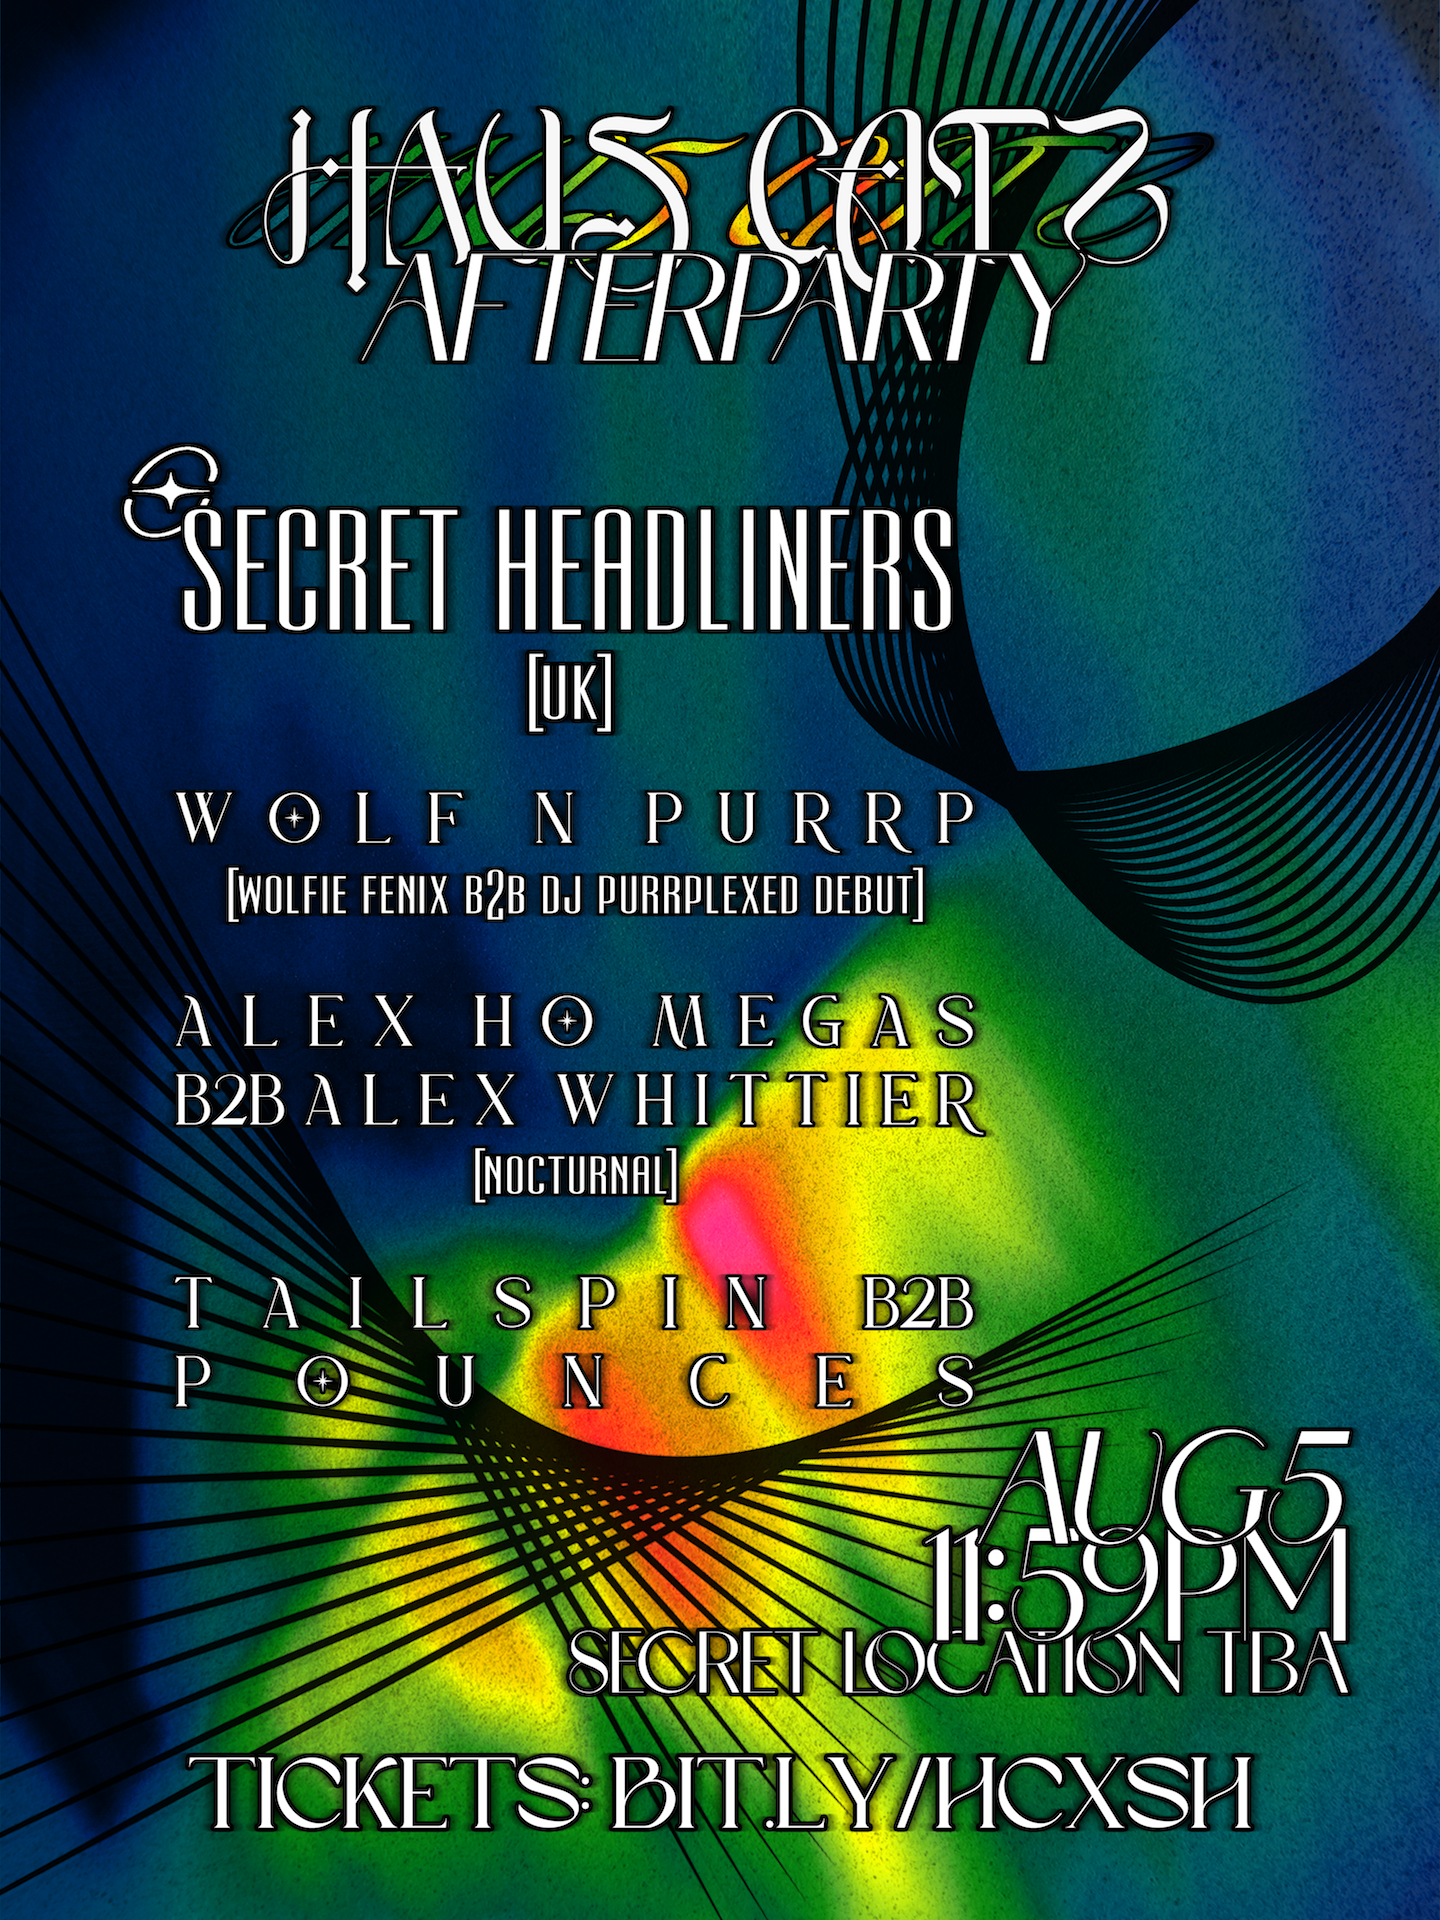 Haus Catz Afterparty ft. 2 Secret Headliners [UK] + Wolf N PurRp [Debut] + Nocturnal Residents - Página frontal